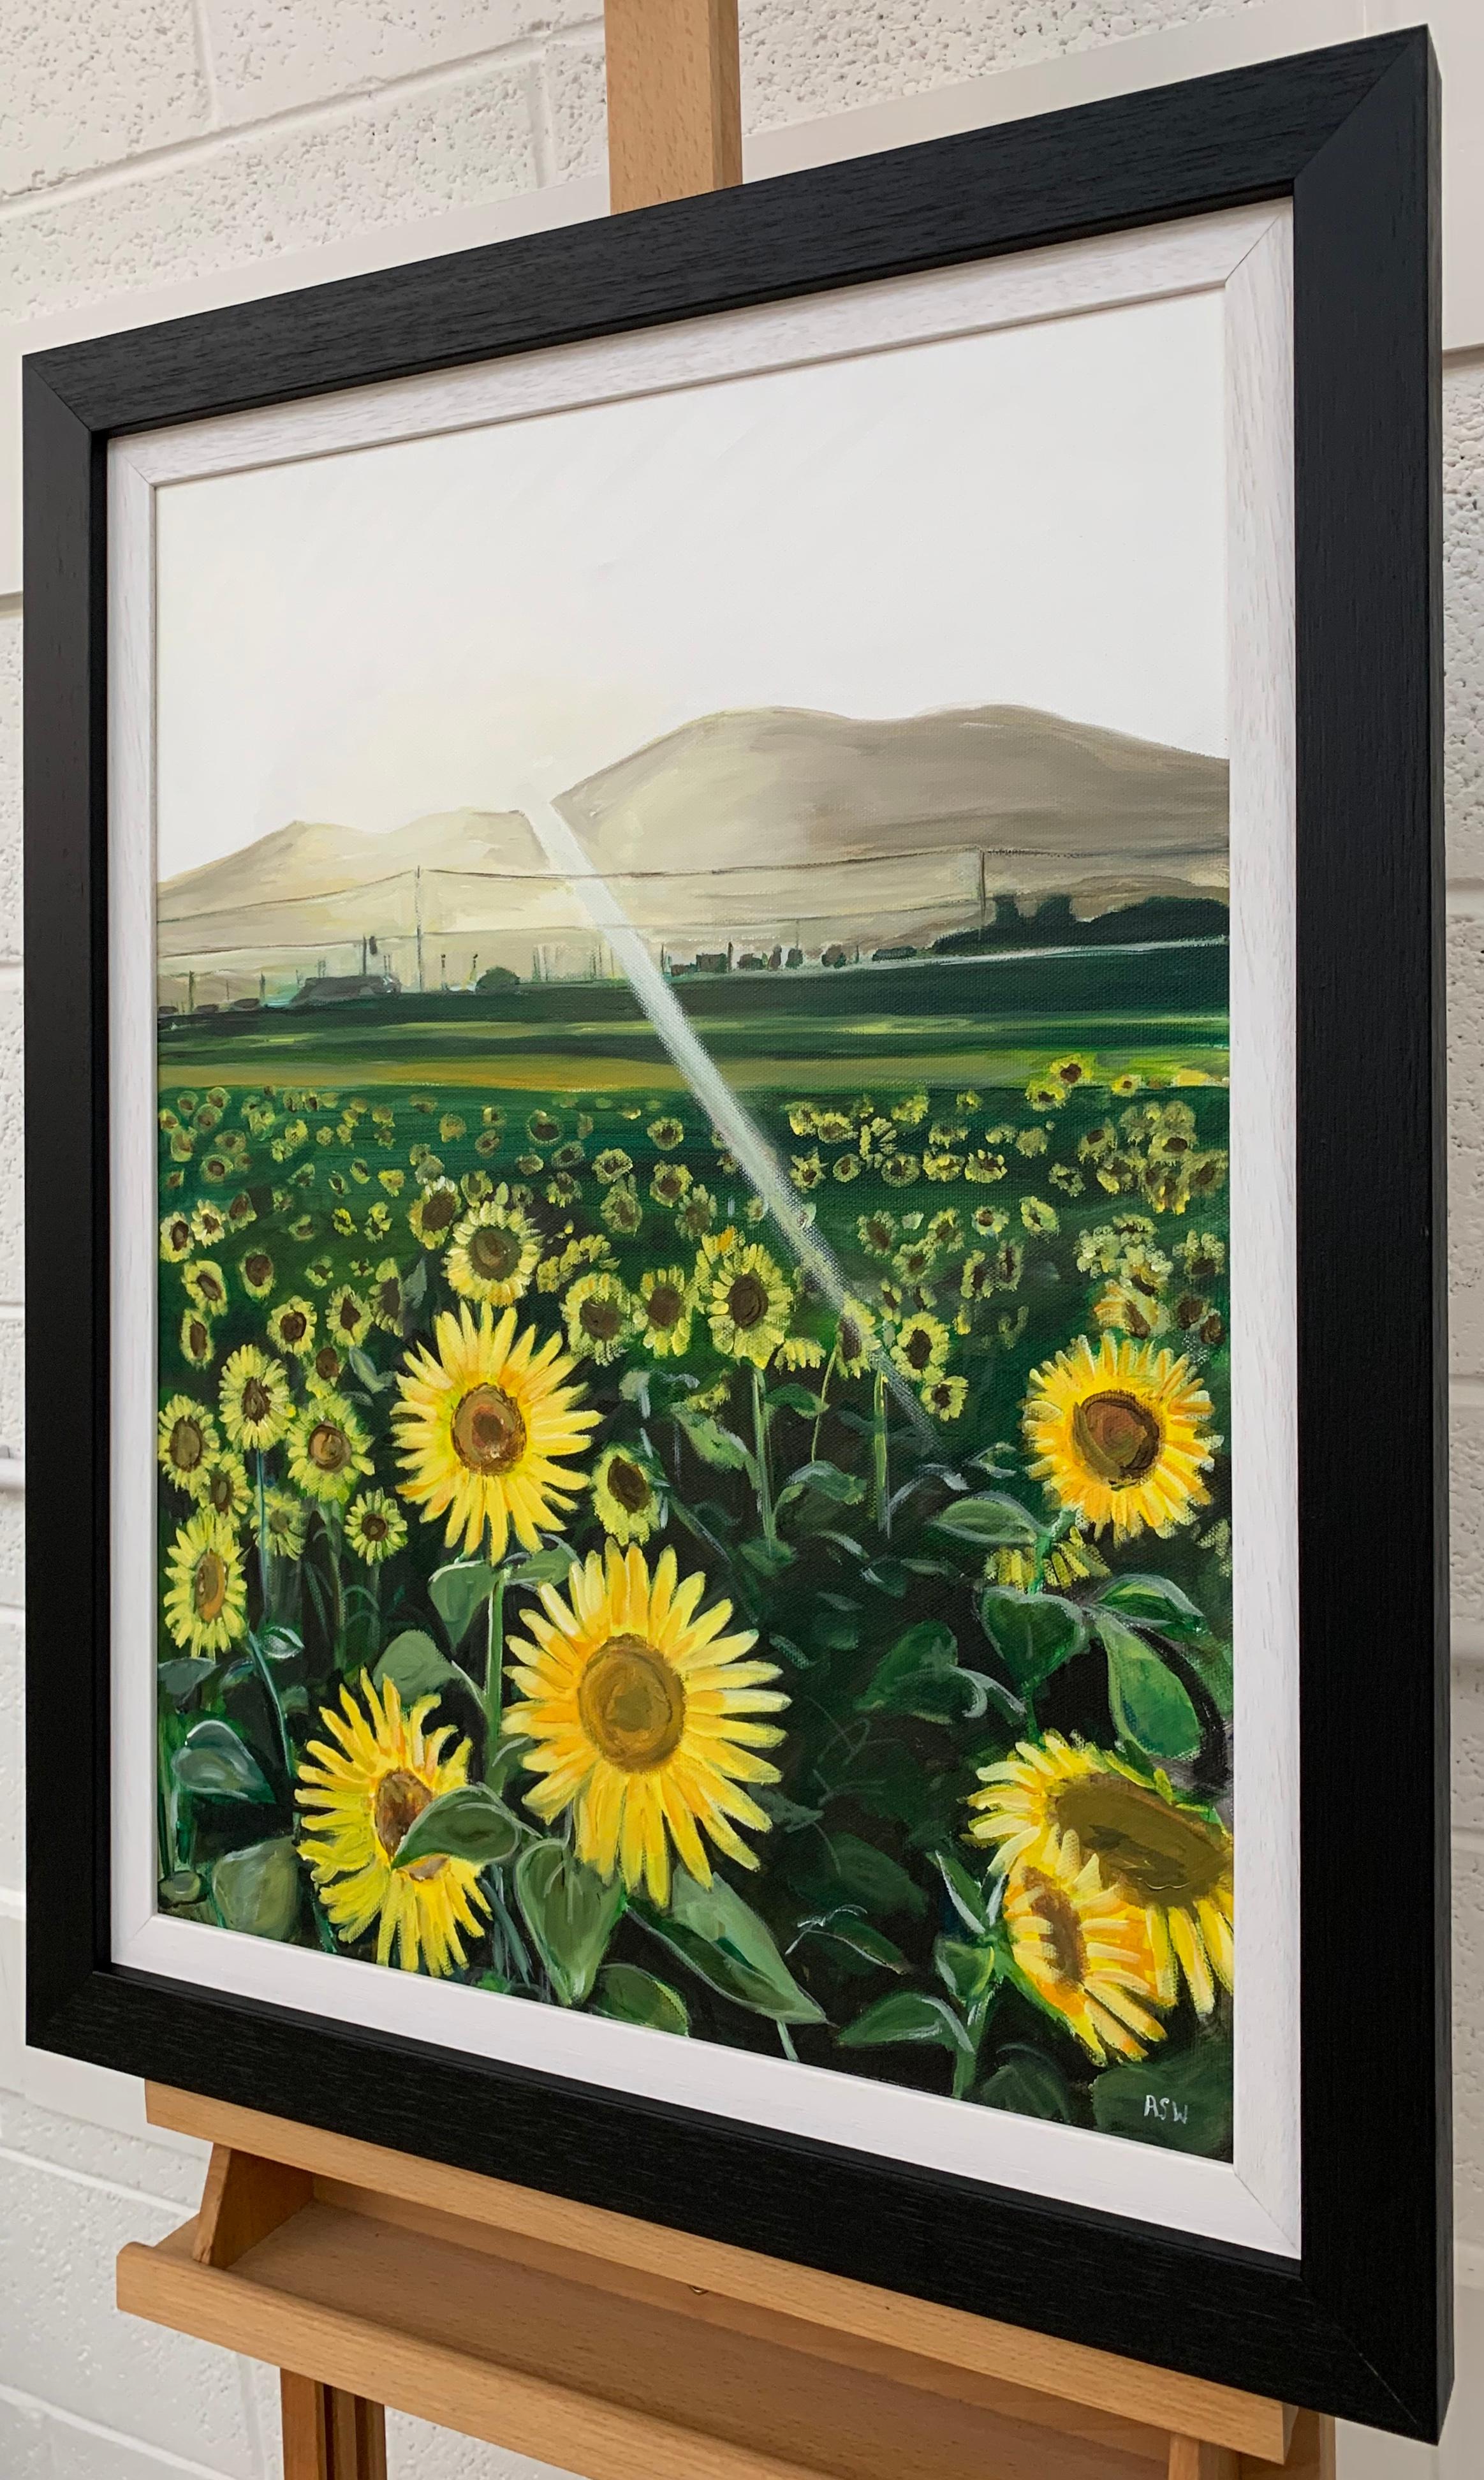 Original Painting of a Field of Sunflowers in Sunshine France by British Artist - Black Figurative Painting by Angela Wakefield